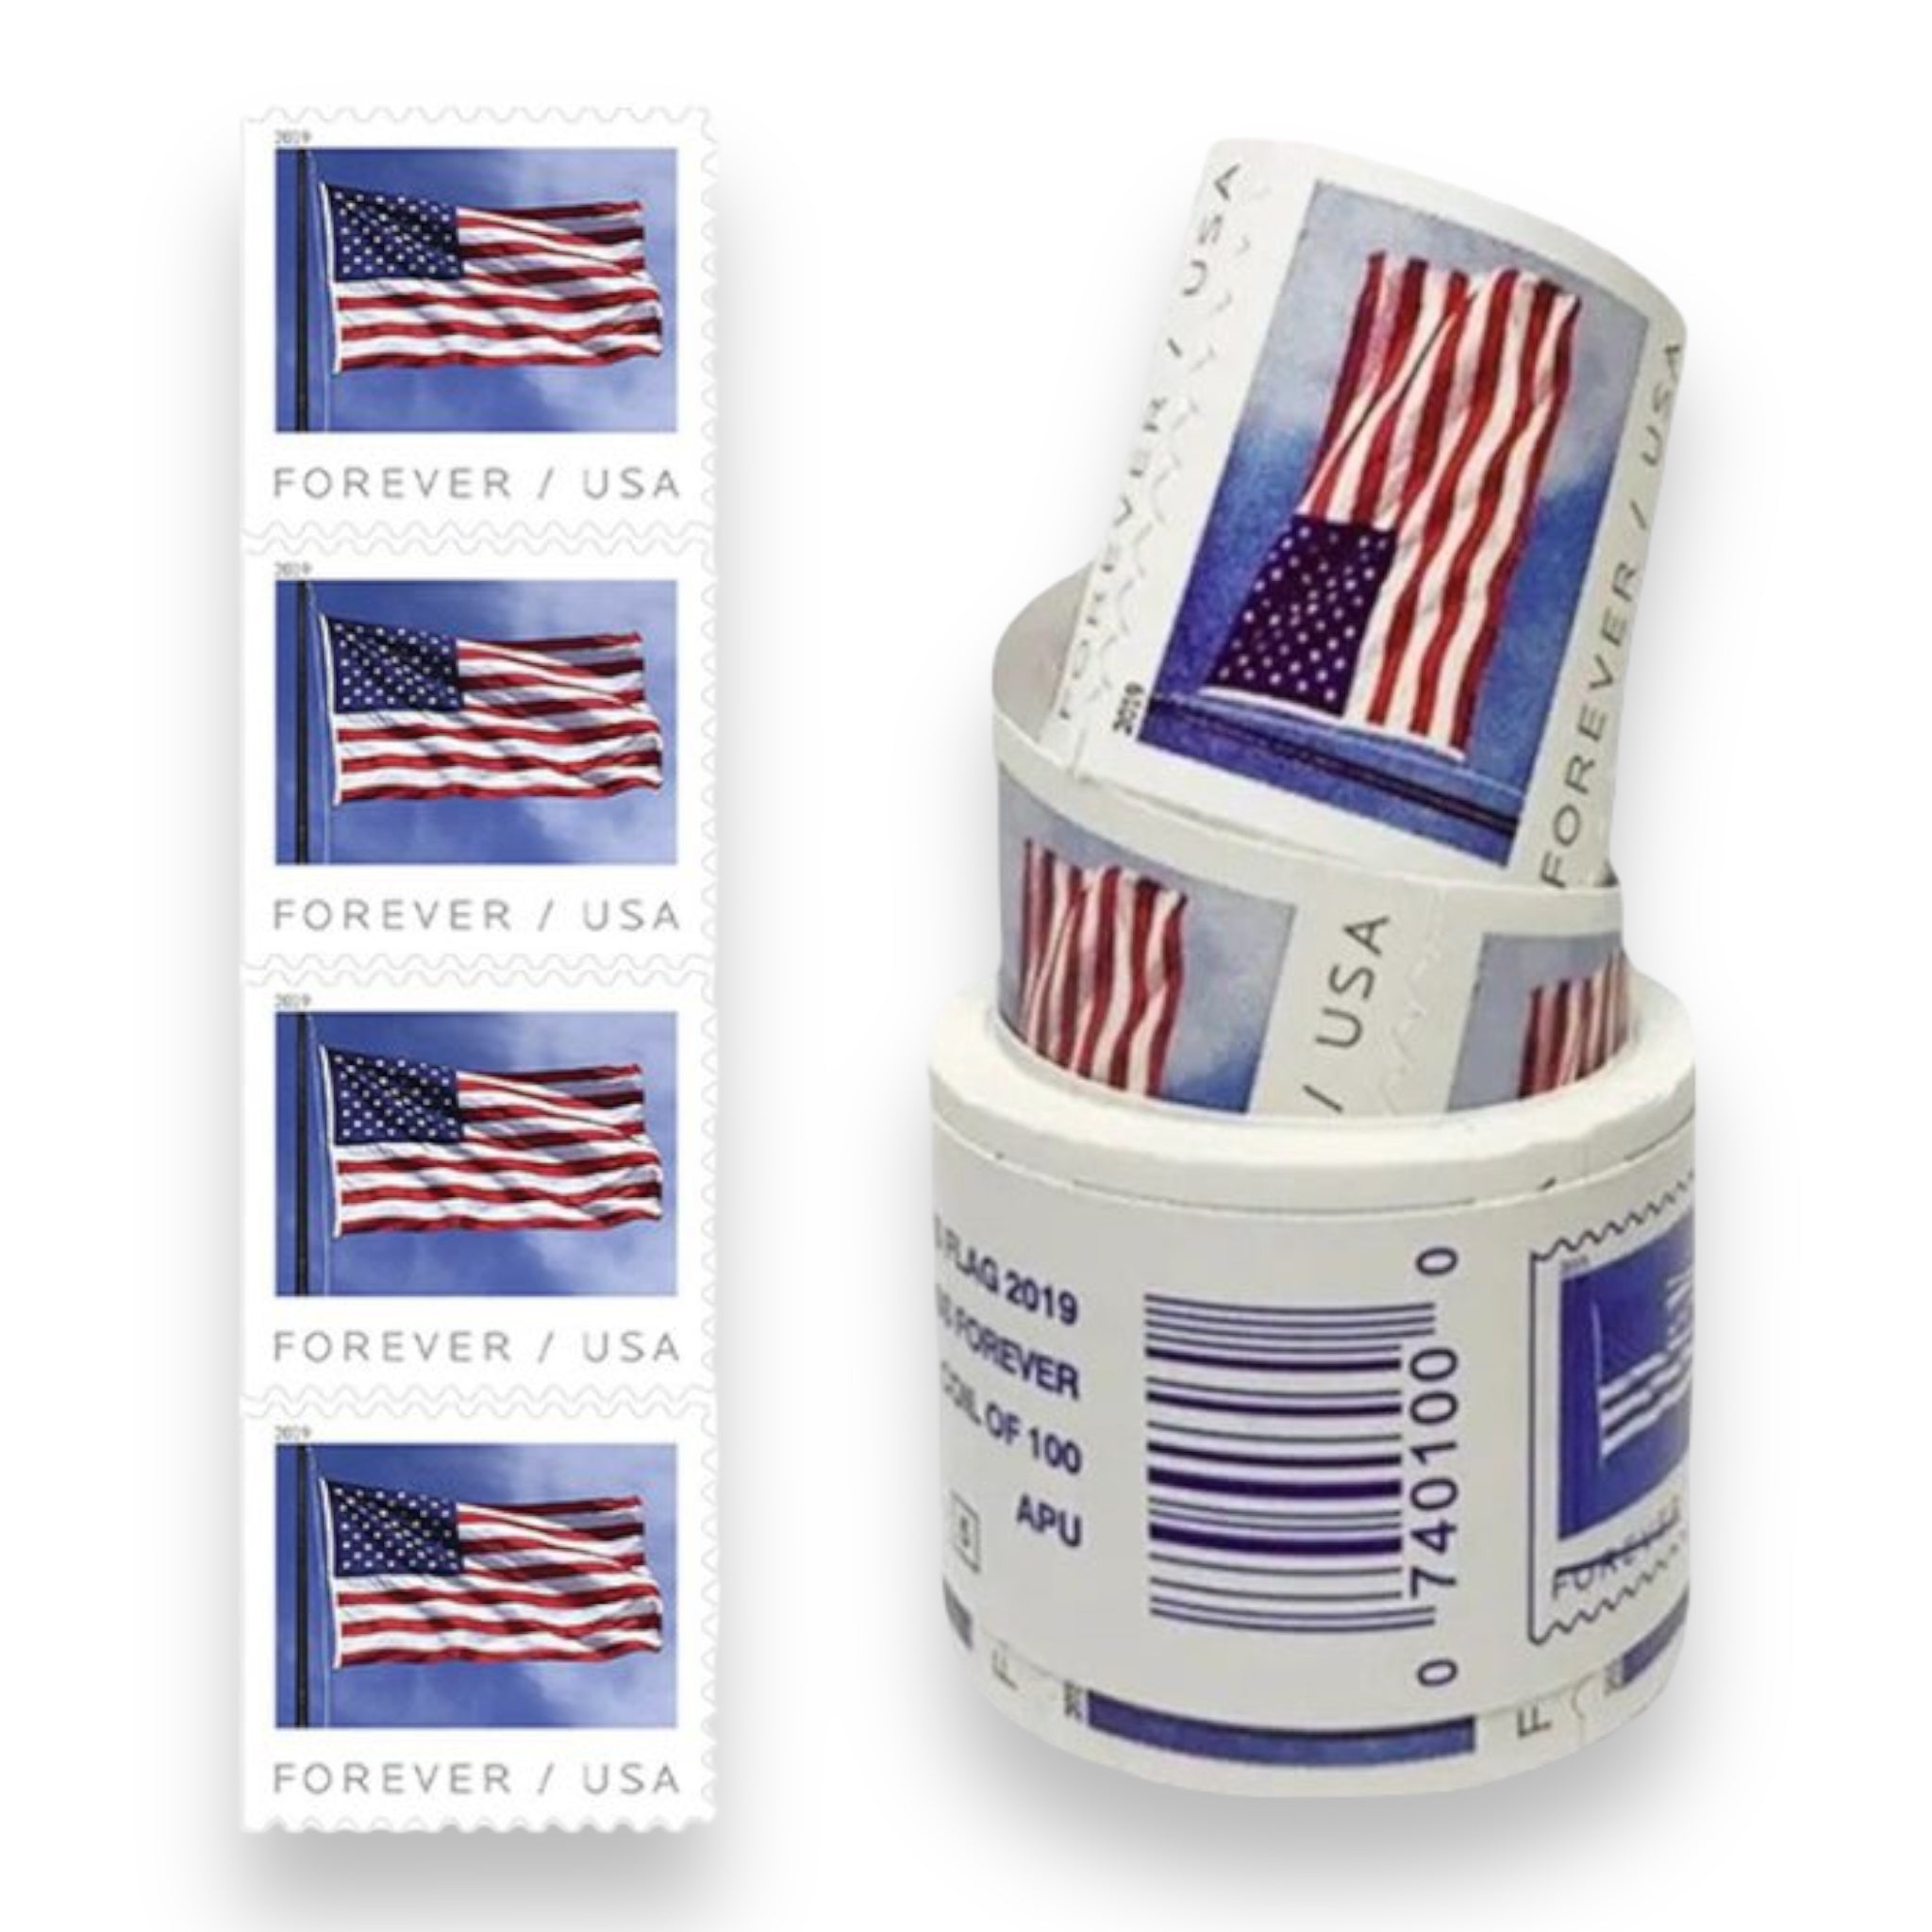 (10) 100 Ct Roll Forever Stamps - 2019 USPS First-Class Mail Postage Stamps  + 1 FREE DISPENSER